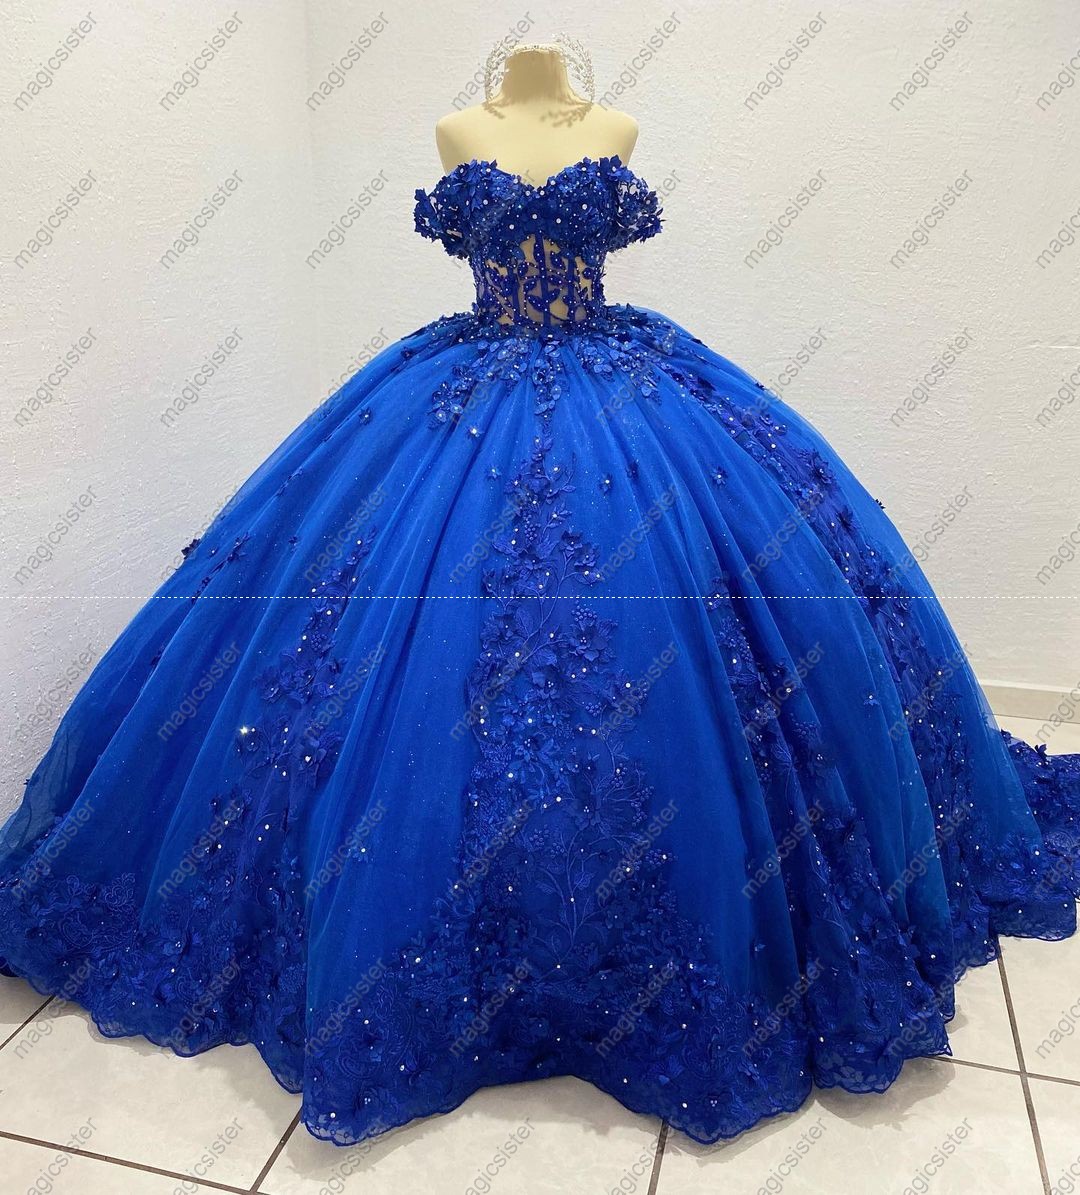 Instock 3D Pearls Embroidered Floral Quinceanera Dress